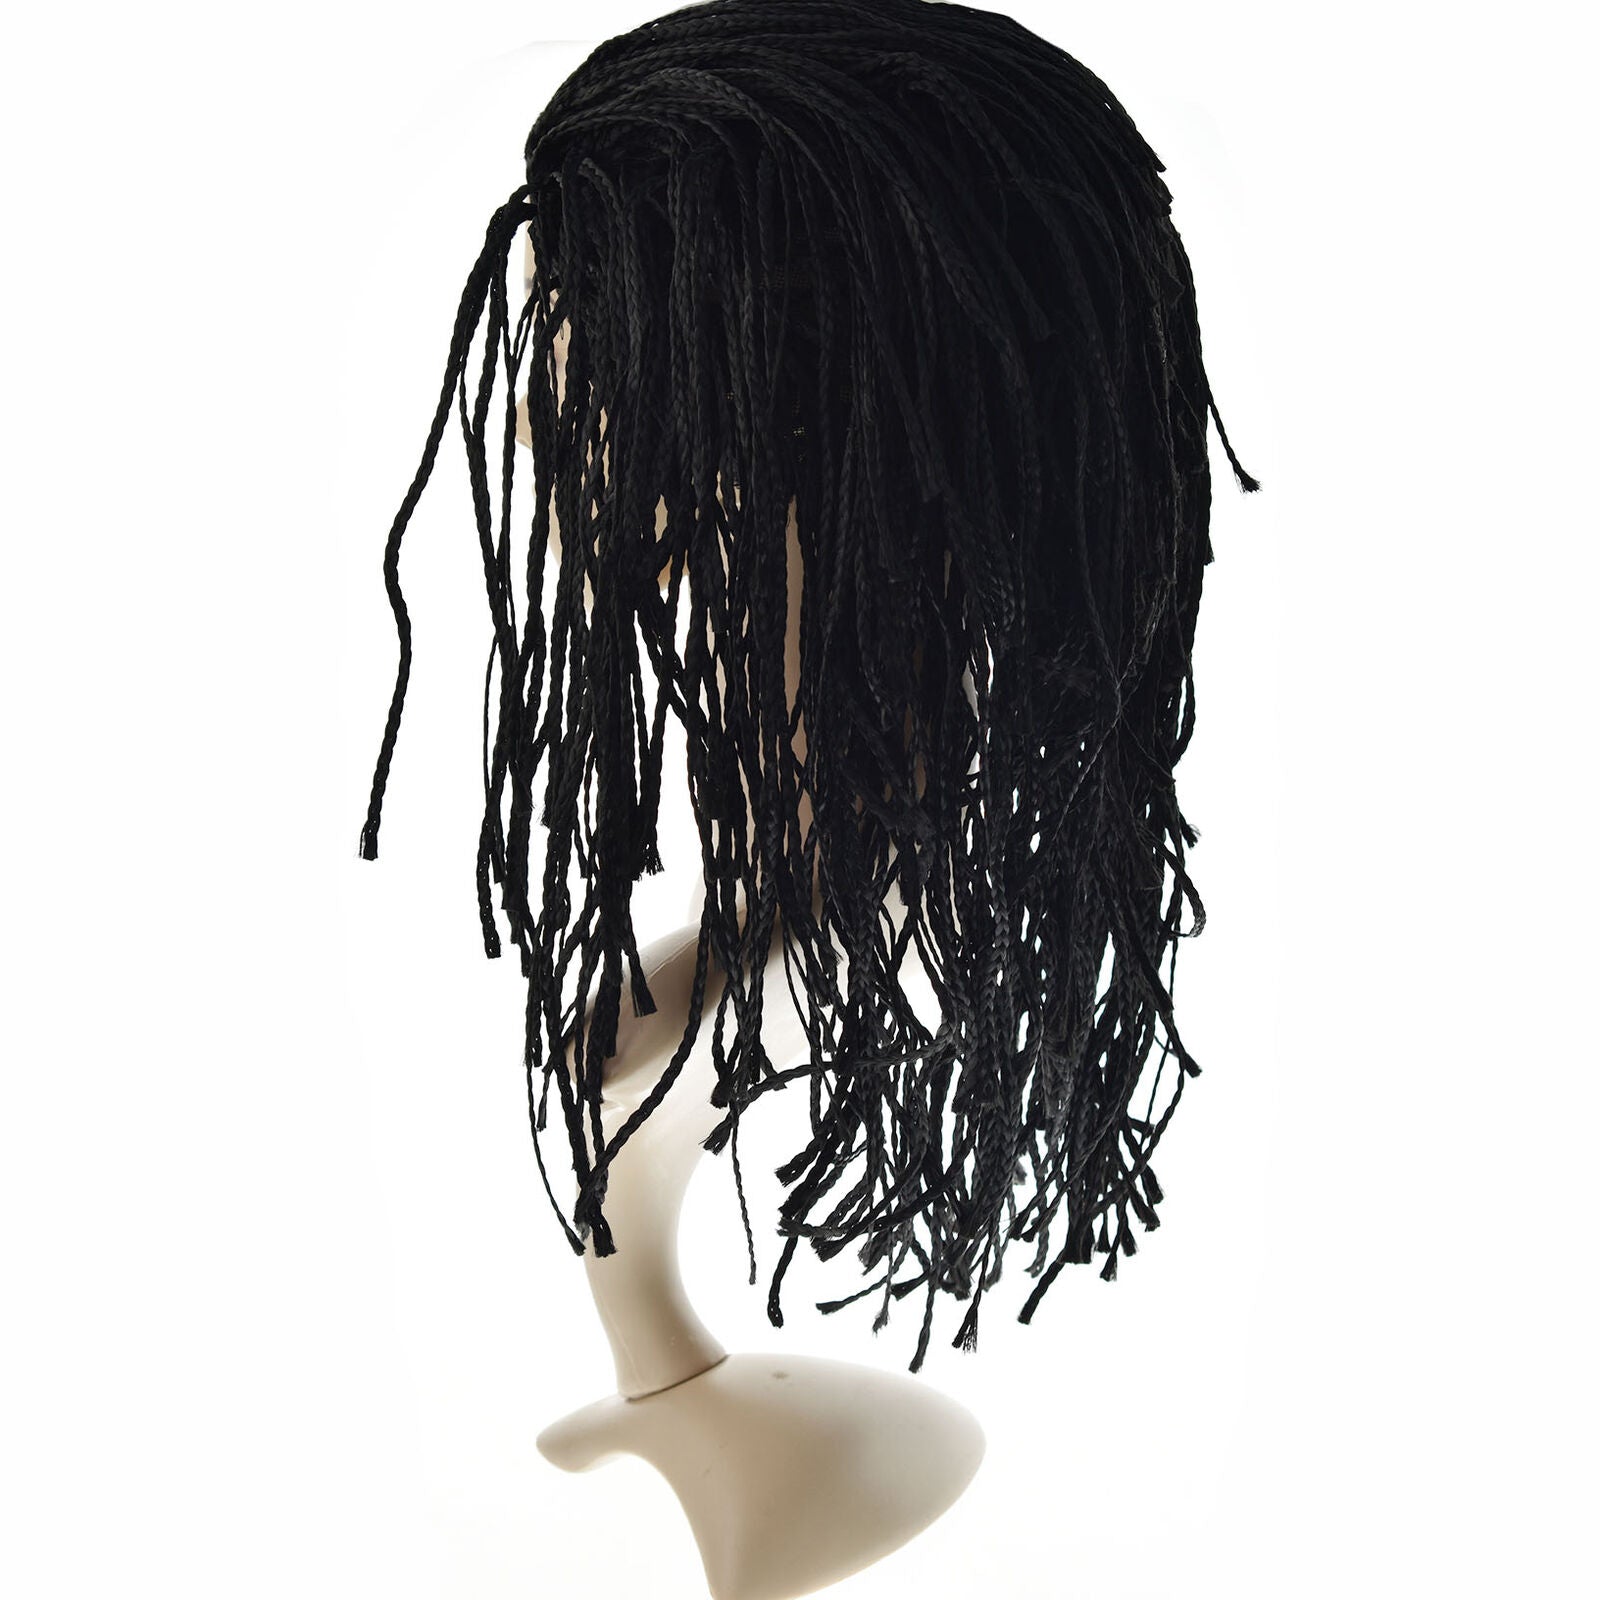 Black Braided Wig Women Box Braids Curly Braided Twisted Synthetic Full Wigs New